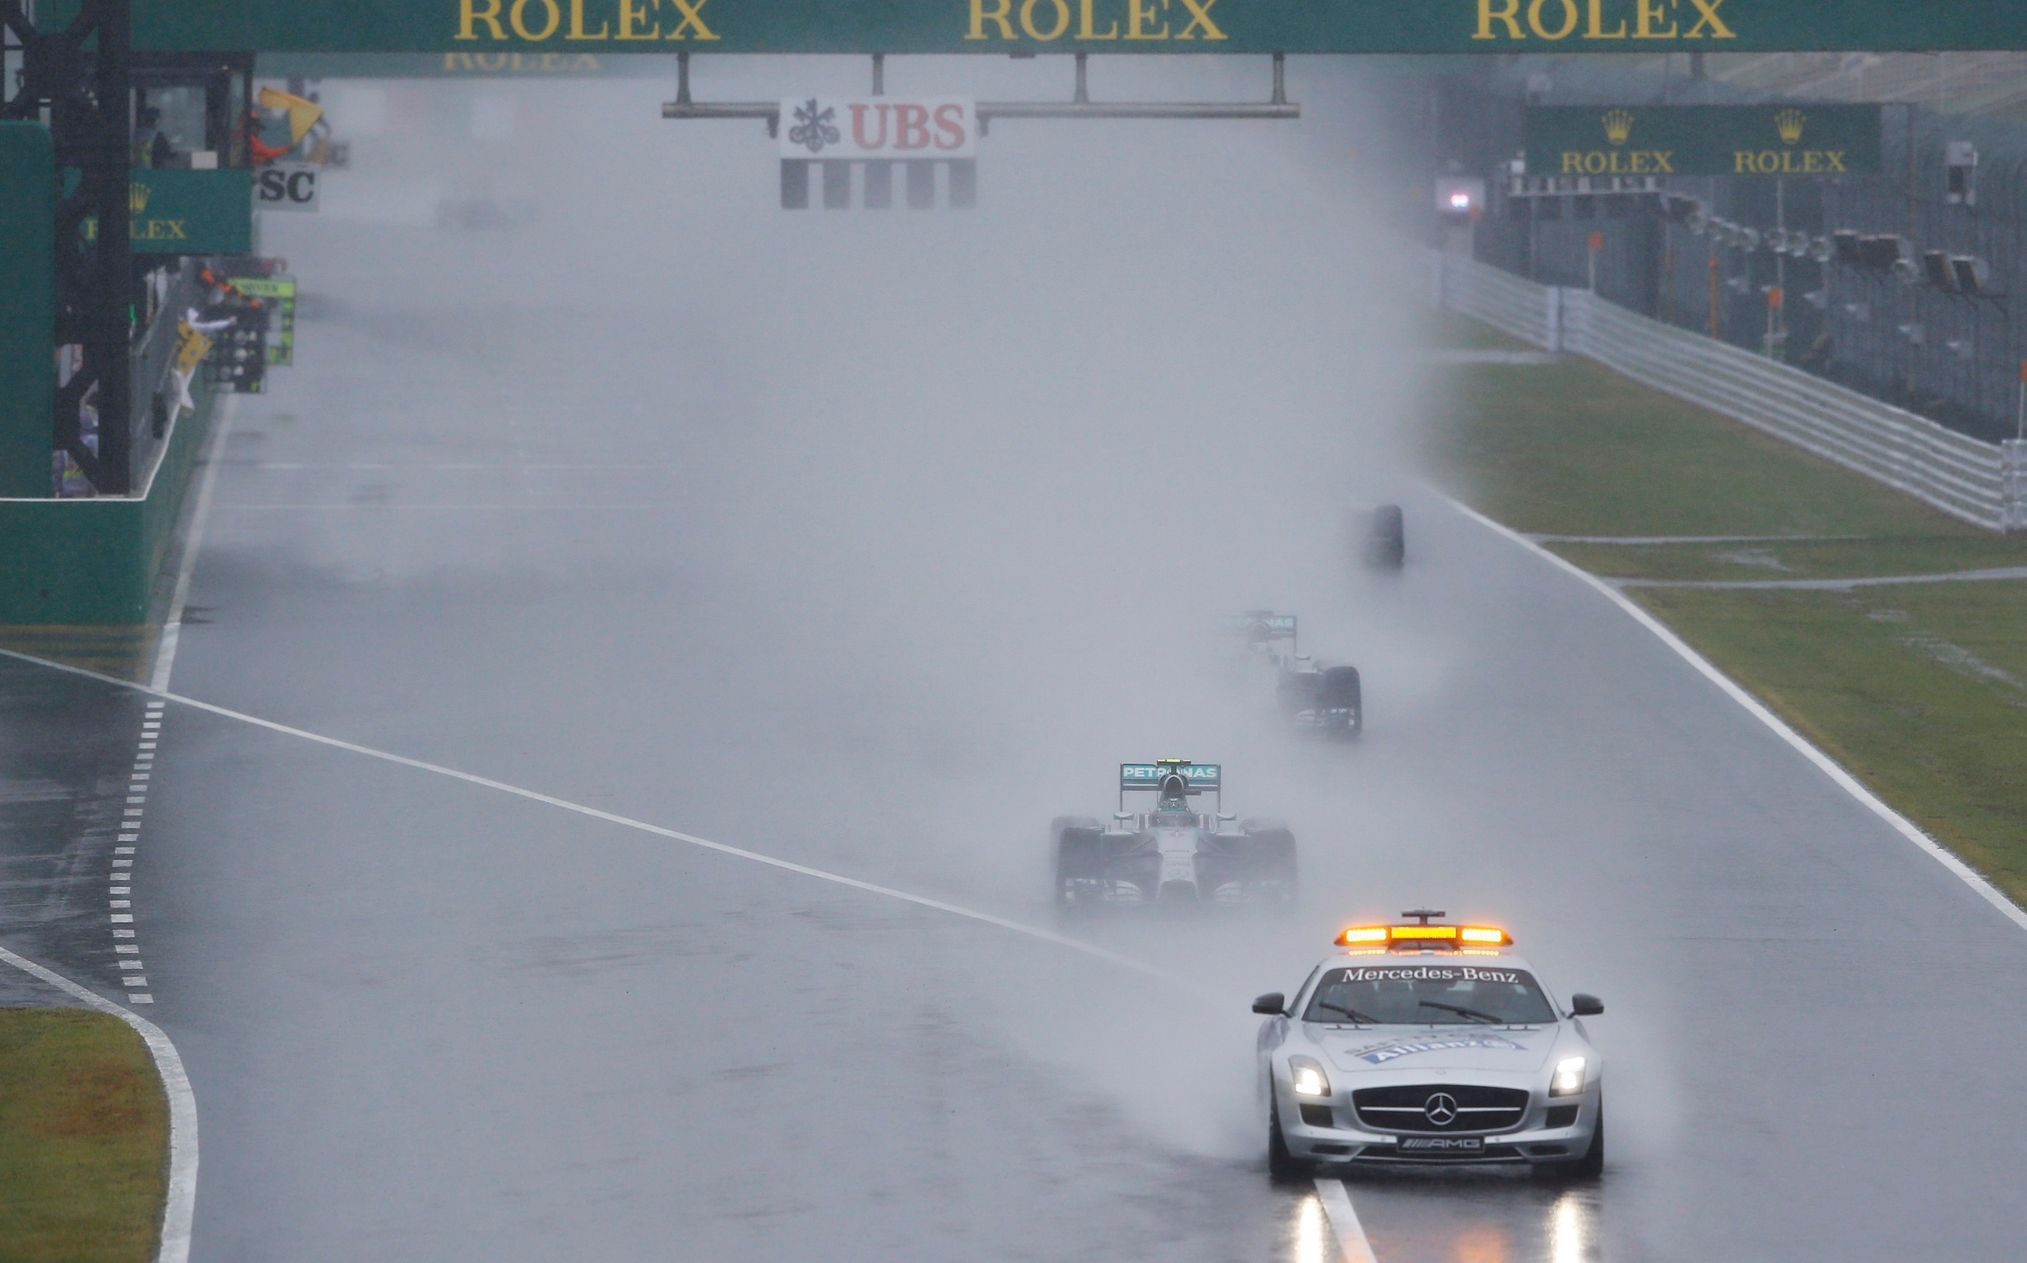 Mercedes Formula One driver Rosberg of Germany leads team mate Hamilton of Britain behind a safety car as they start the first lap of the rain-affected Japanese F1 Grand Prix at the Suzuka Circuit